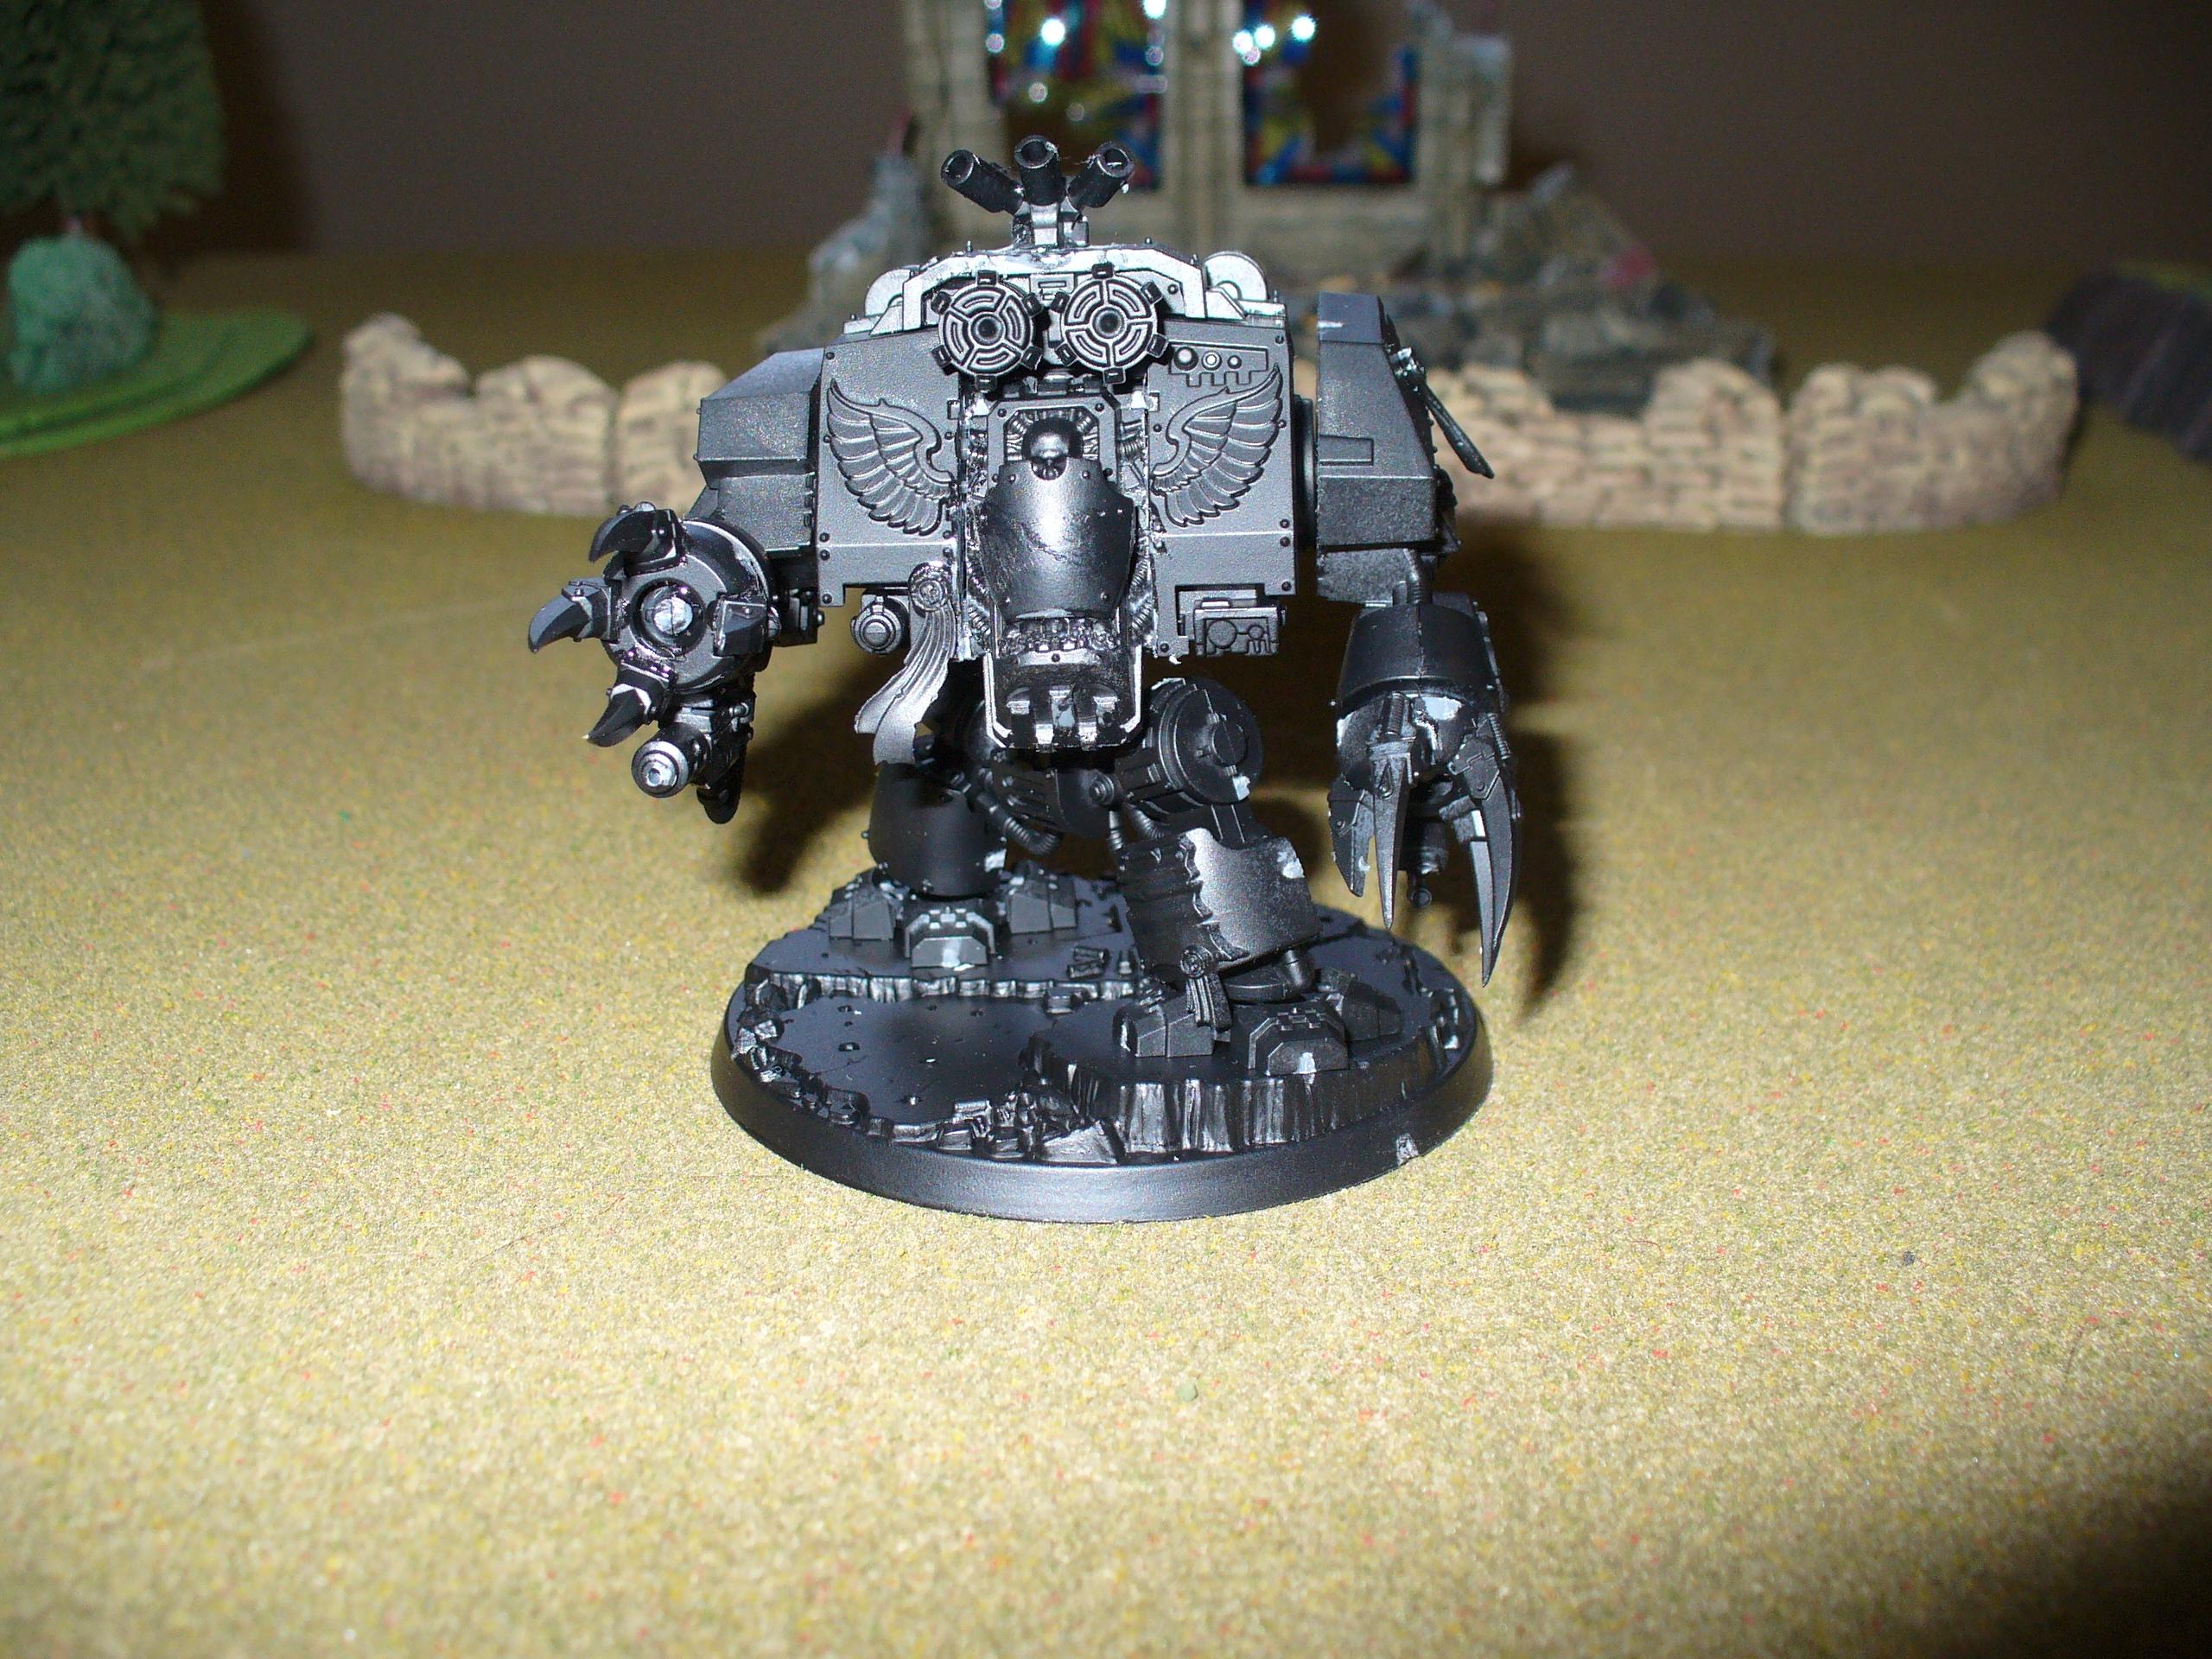 Very cool looking Dreadnought ready for more paint